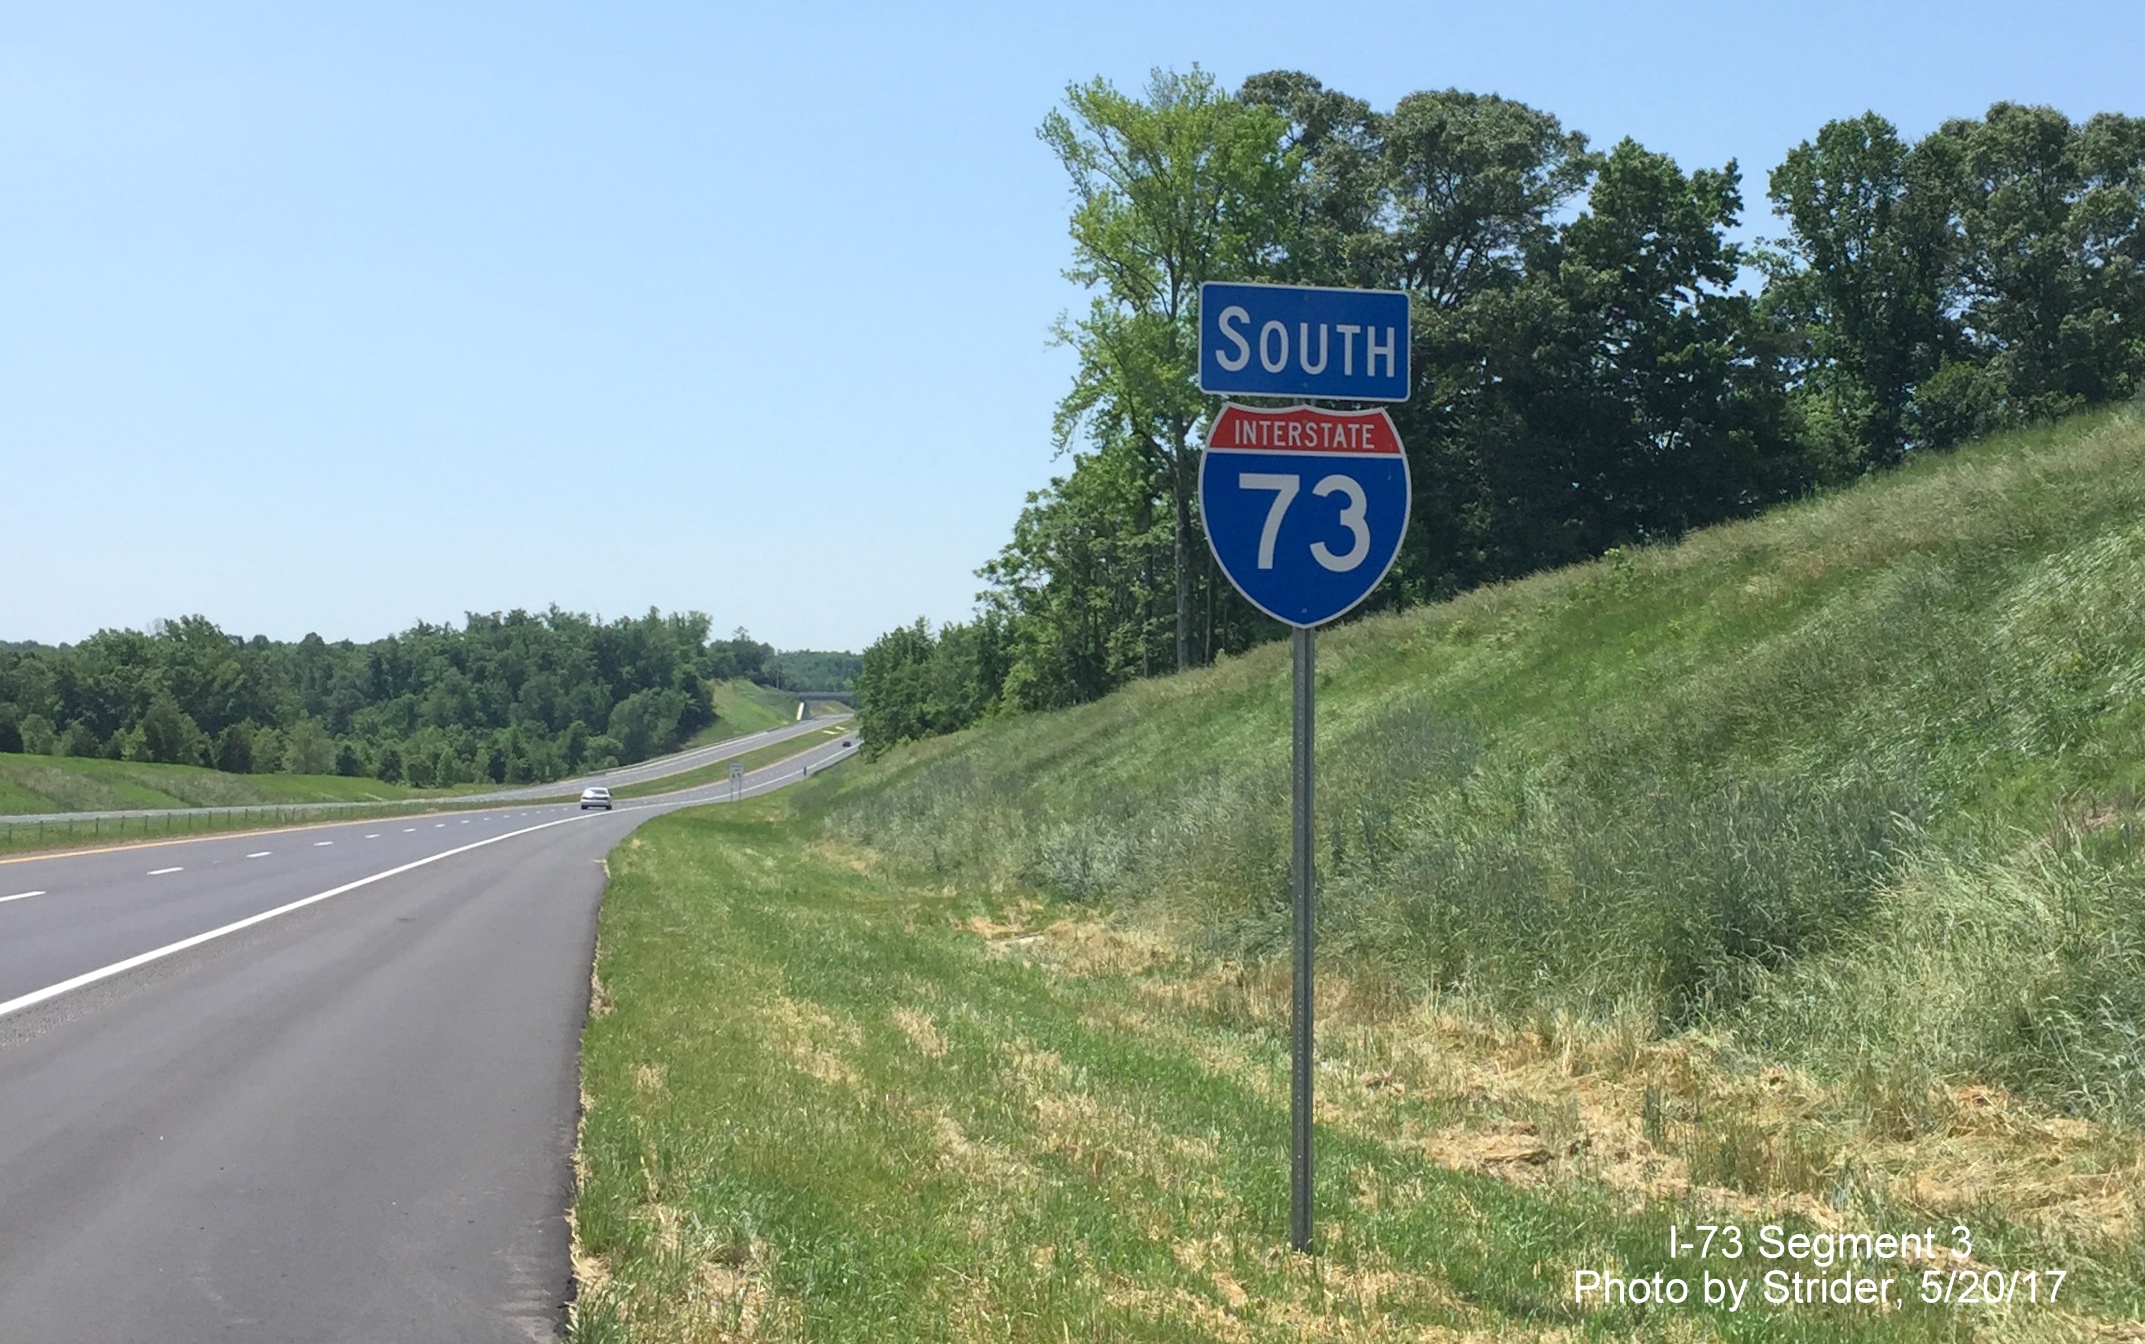 Image taken of new I-73 South trailblazer beyond NC 150 exit in Summerfield, by Strider